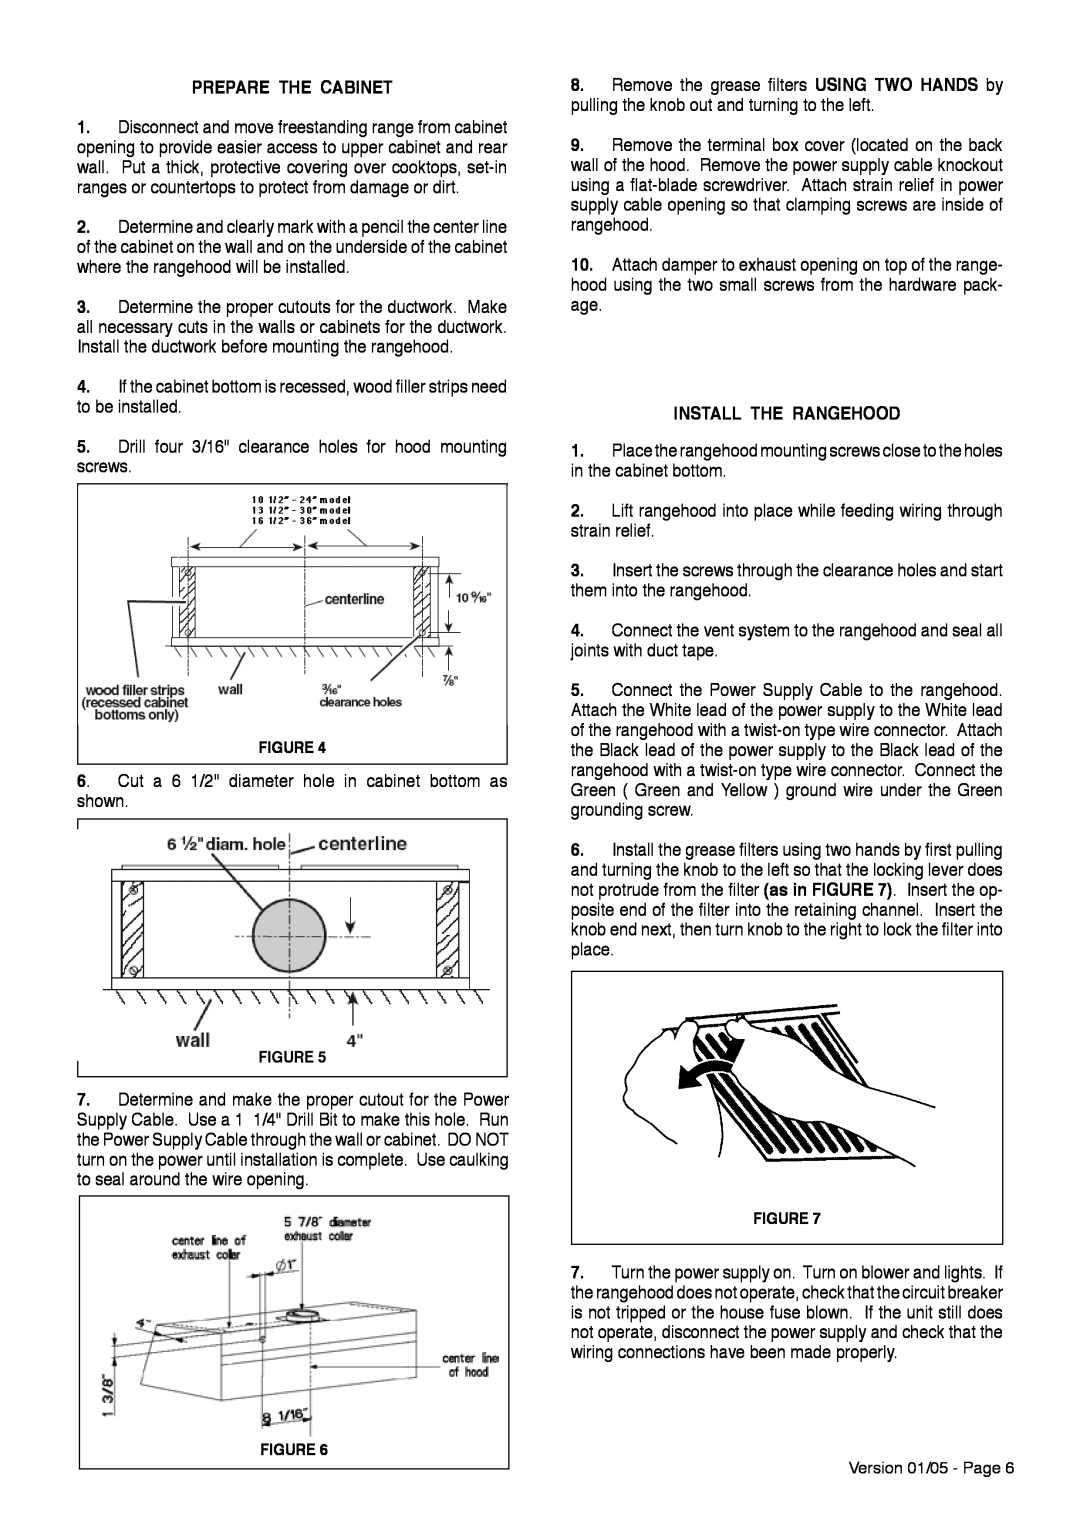 Faber 5x20 5A installation instructions Prepare The Cabinet, Install The Rangehood 